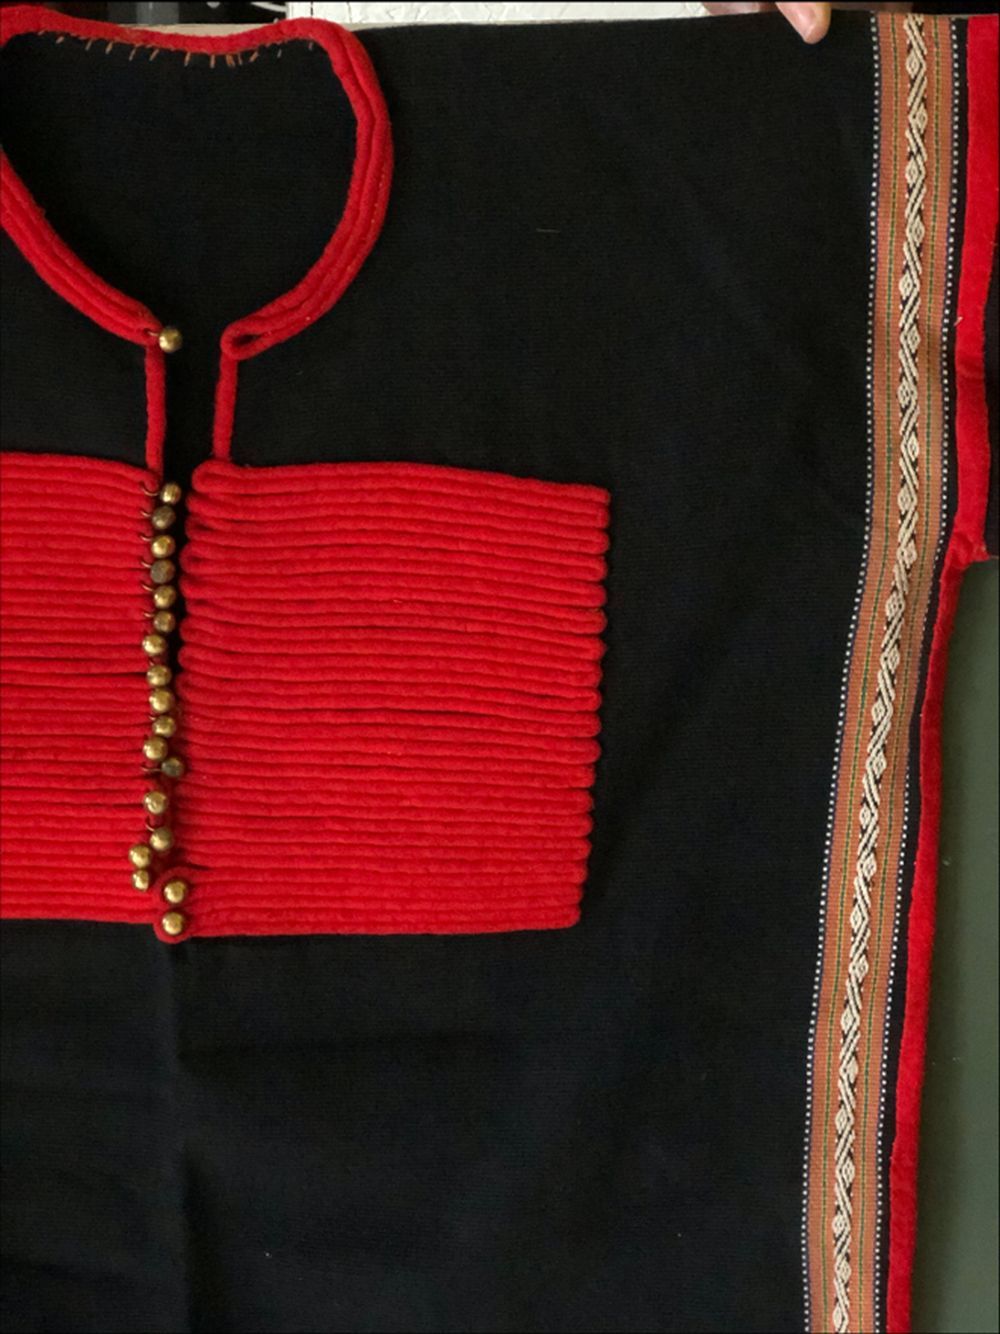 AN UNUSUAL ETHNIC JACKET, 20th Century, possibly Chinese minority people, red embroidered on a black